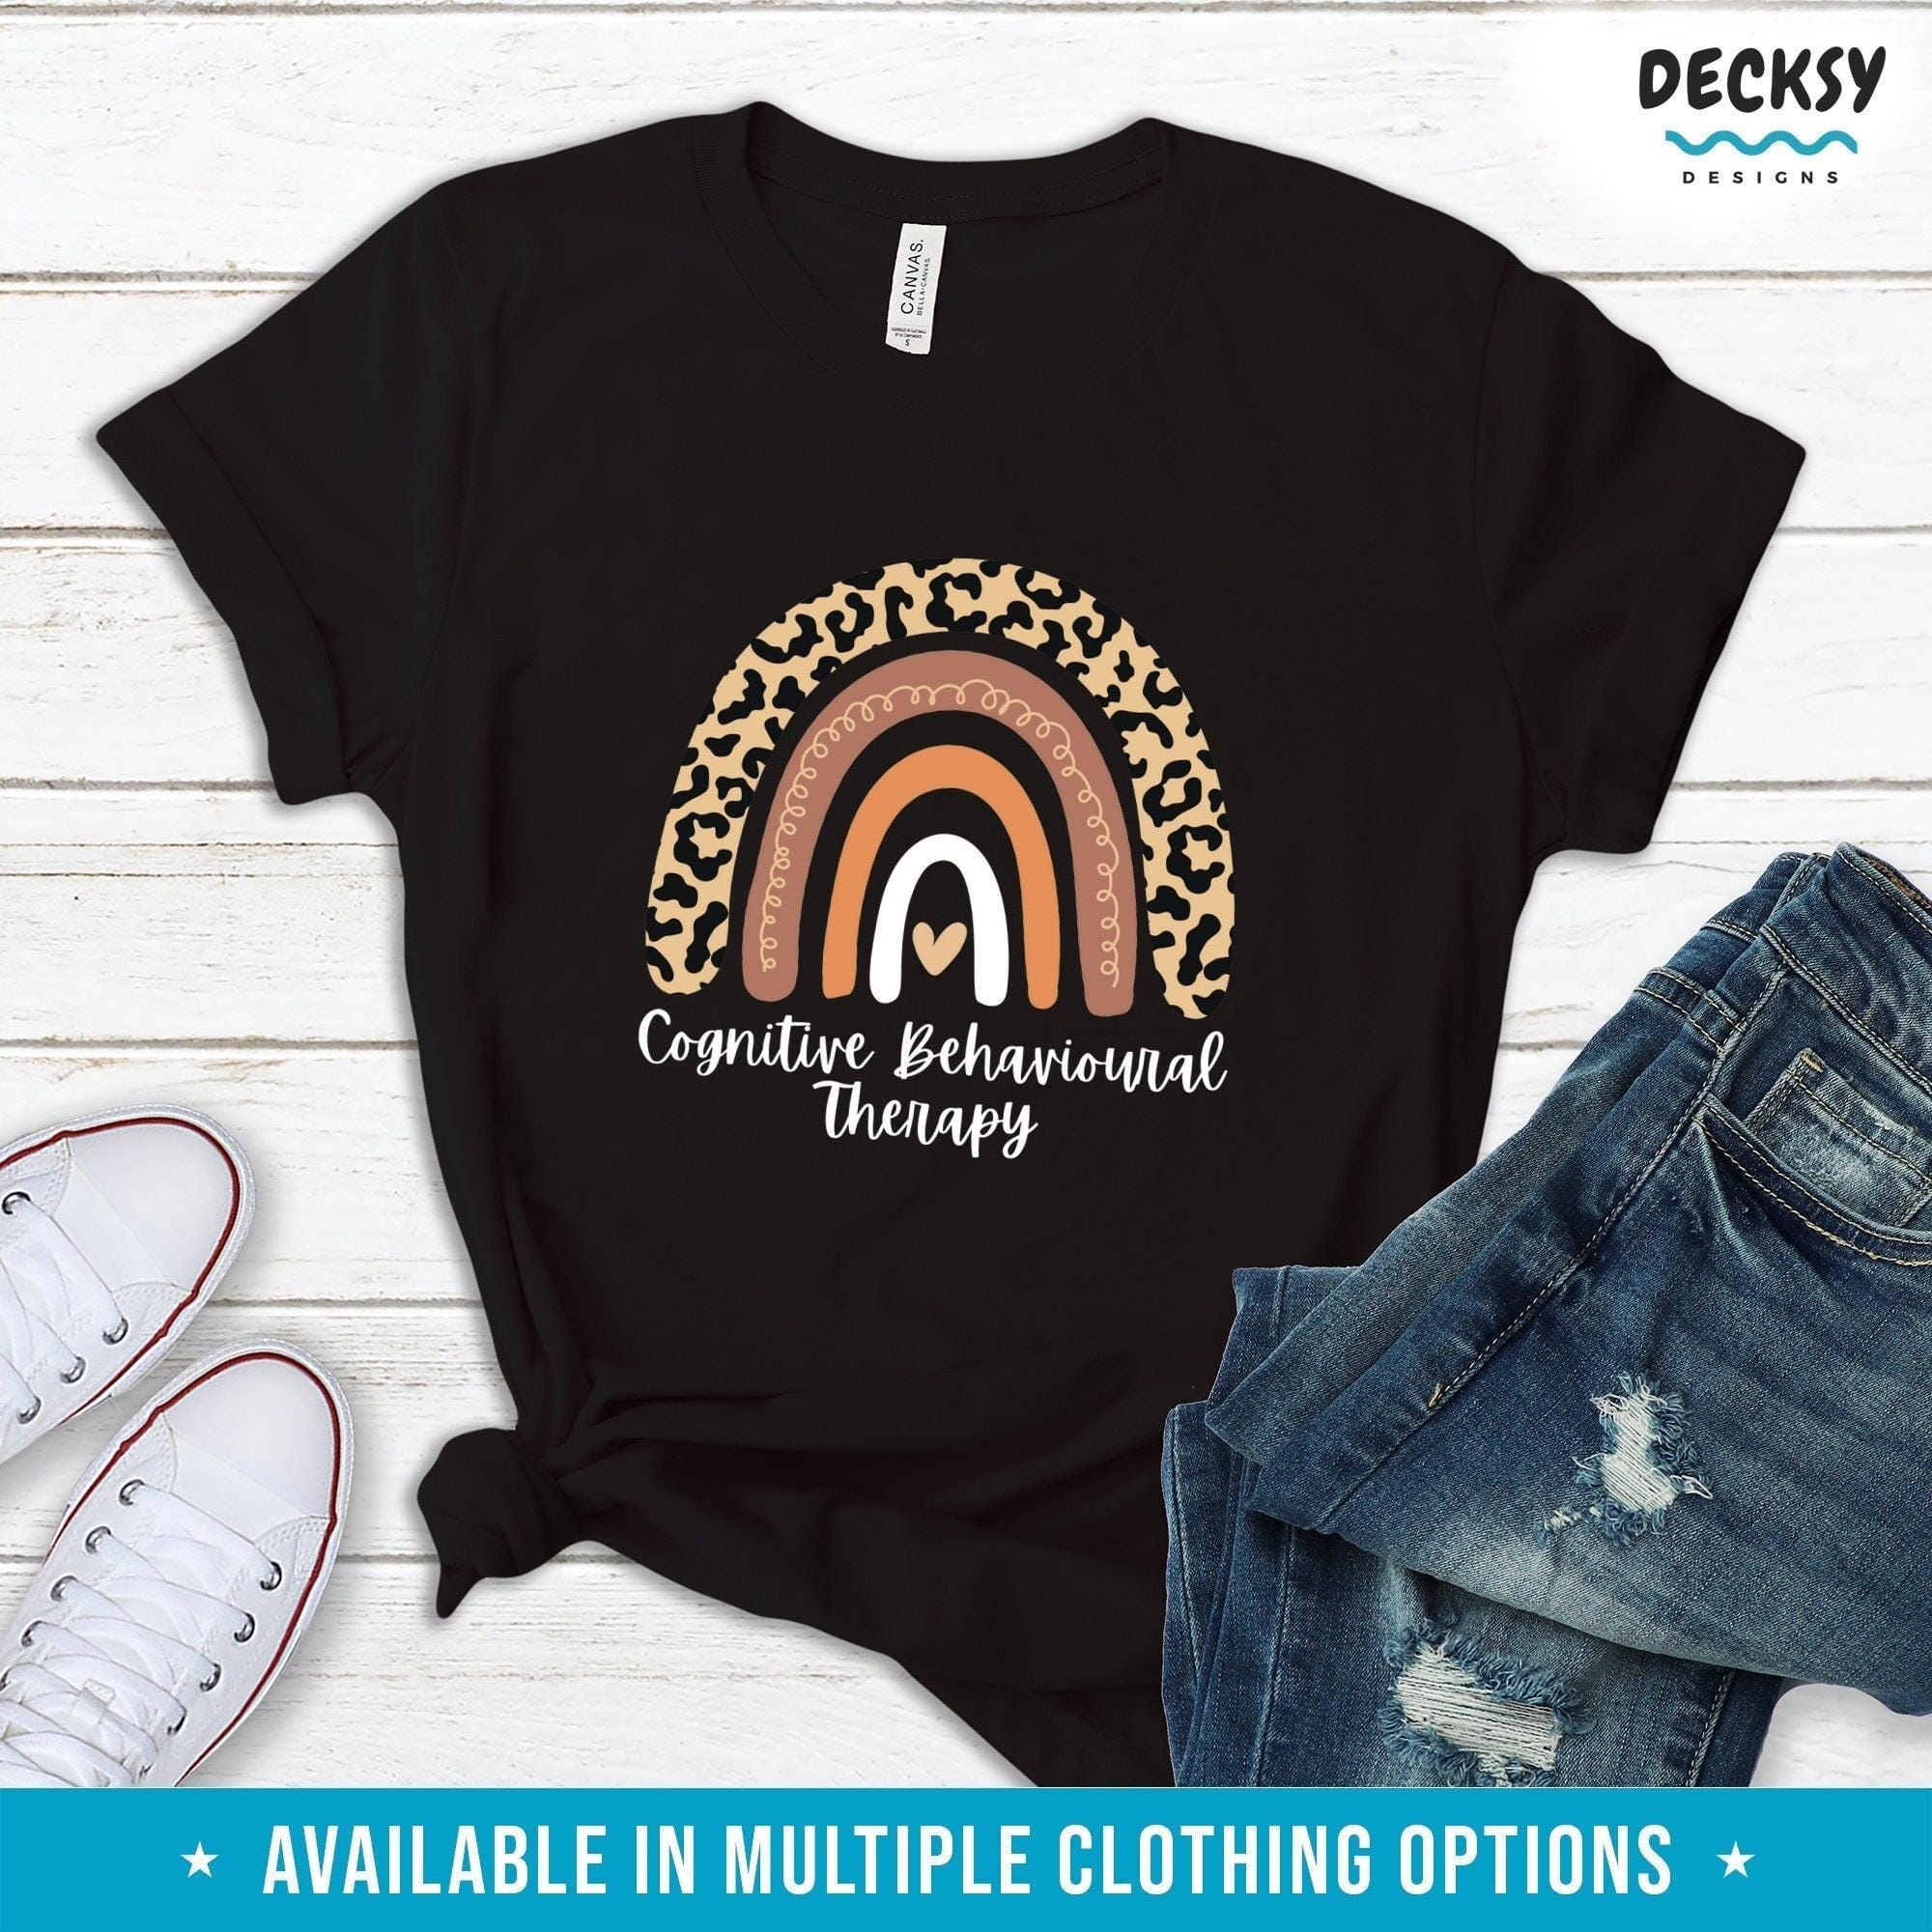 Cognitive Behavioural Therapy Shirt, Gift For Therapist-Clothing:Gender-Neutral Adult Clothing:Tops & Tees:T-shirts:Graphic Tees-DecksyDesigns